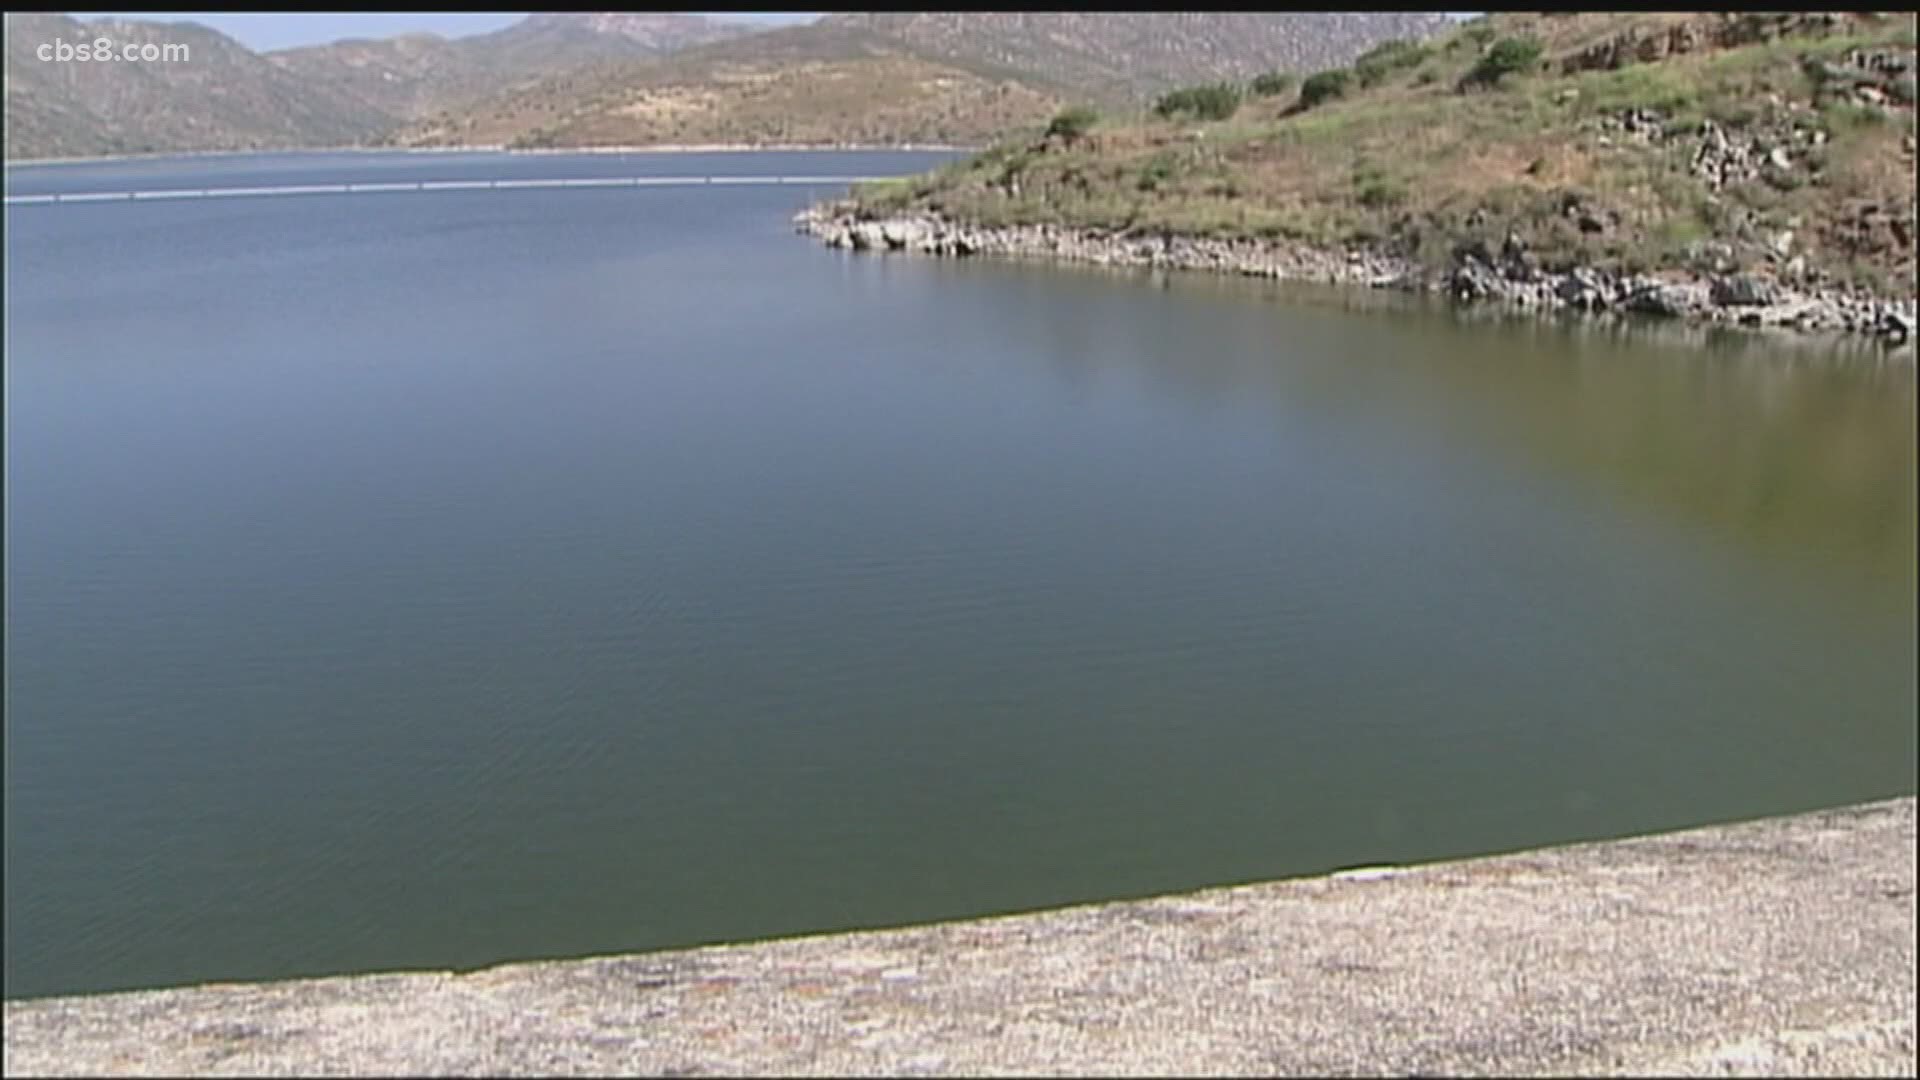 Senator Joel Anderson (retired) along with other active lake users are calling on local officials to reopen lakes in San Diego's east county.